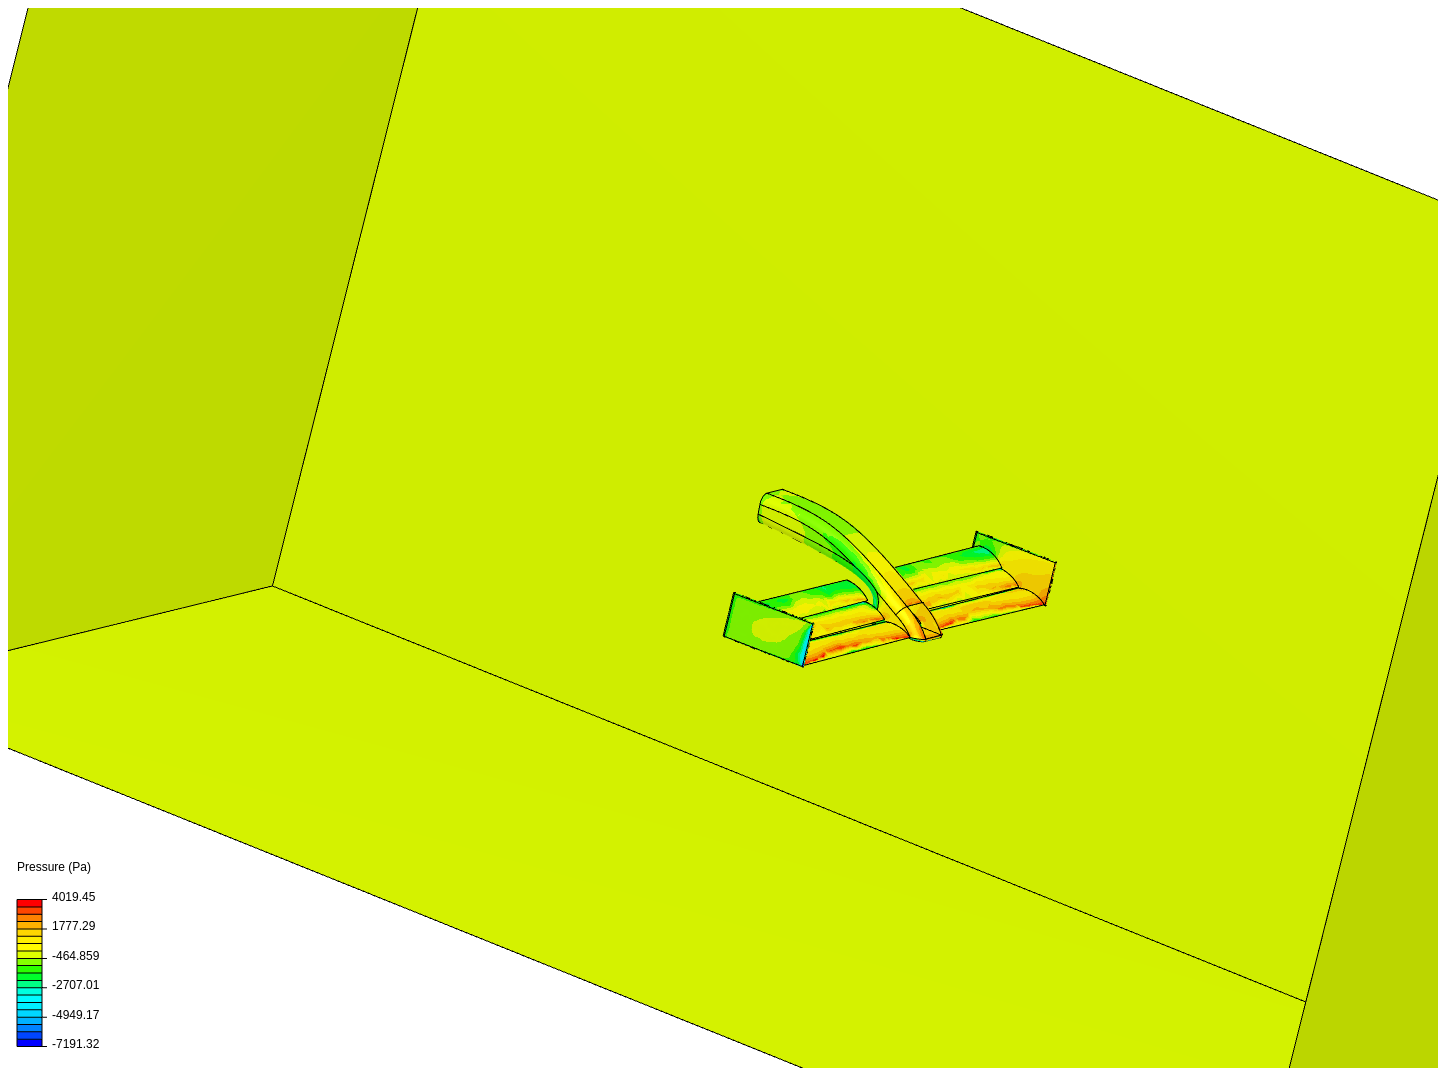 F1 Wing concept CFD image